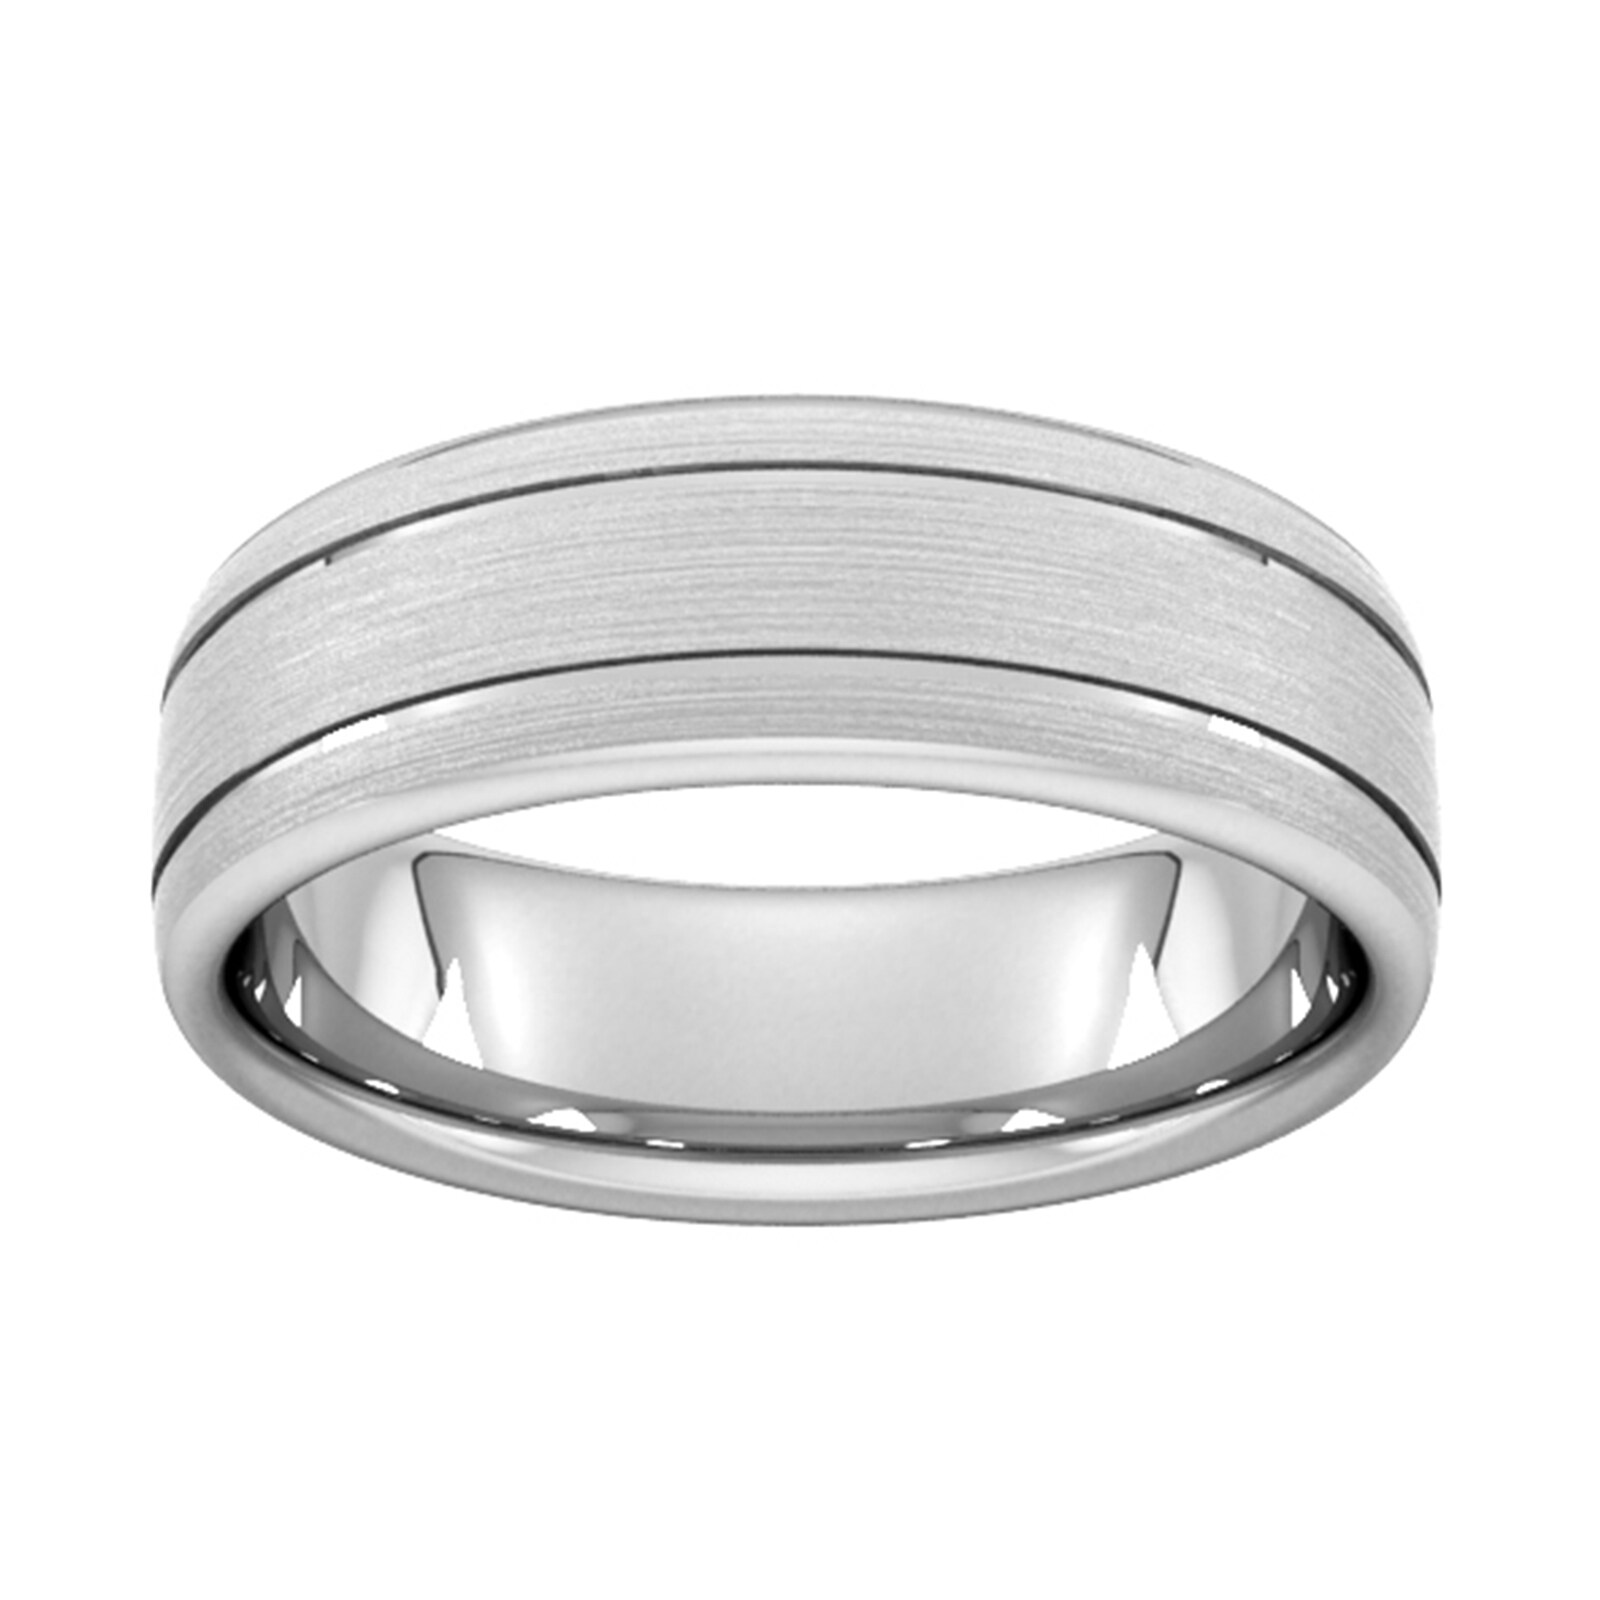 7mm D Shape Heavy Matt Finish With Double Grooves Wedding Ring In 9 Carat White Gold - Ring Size V